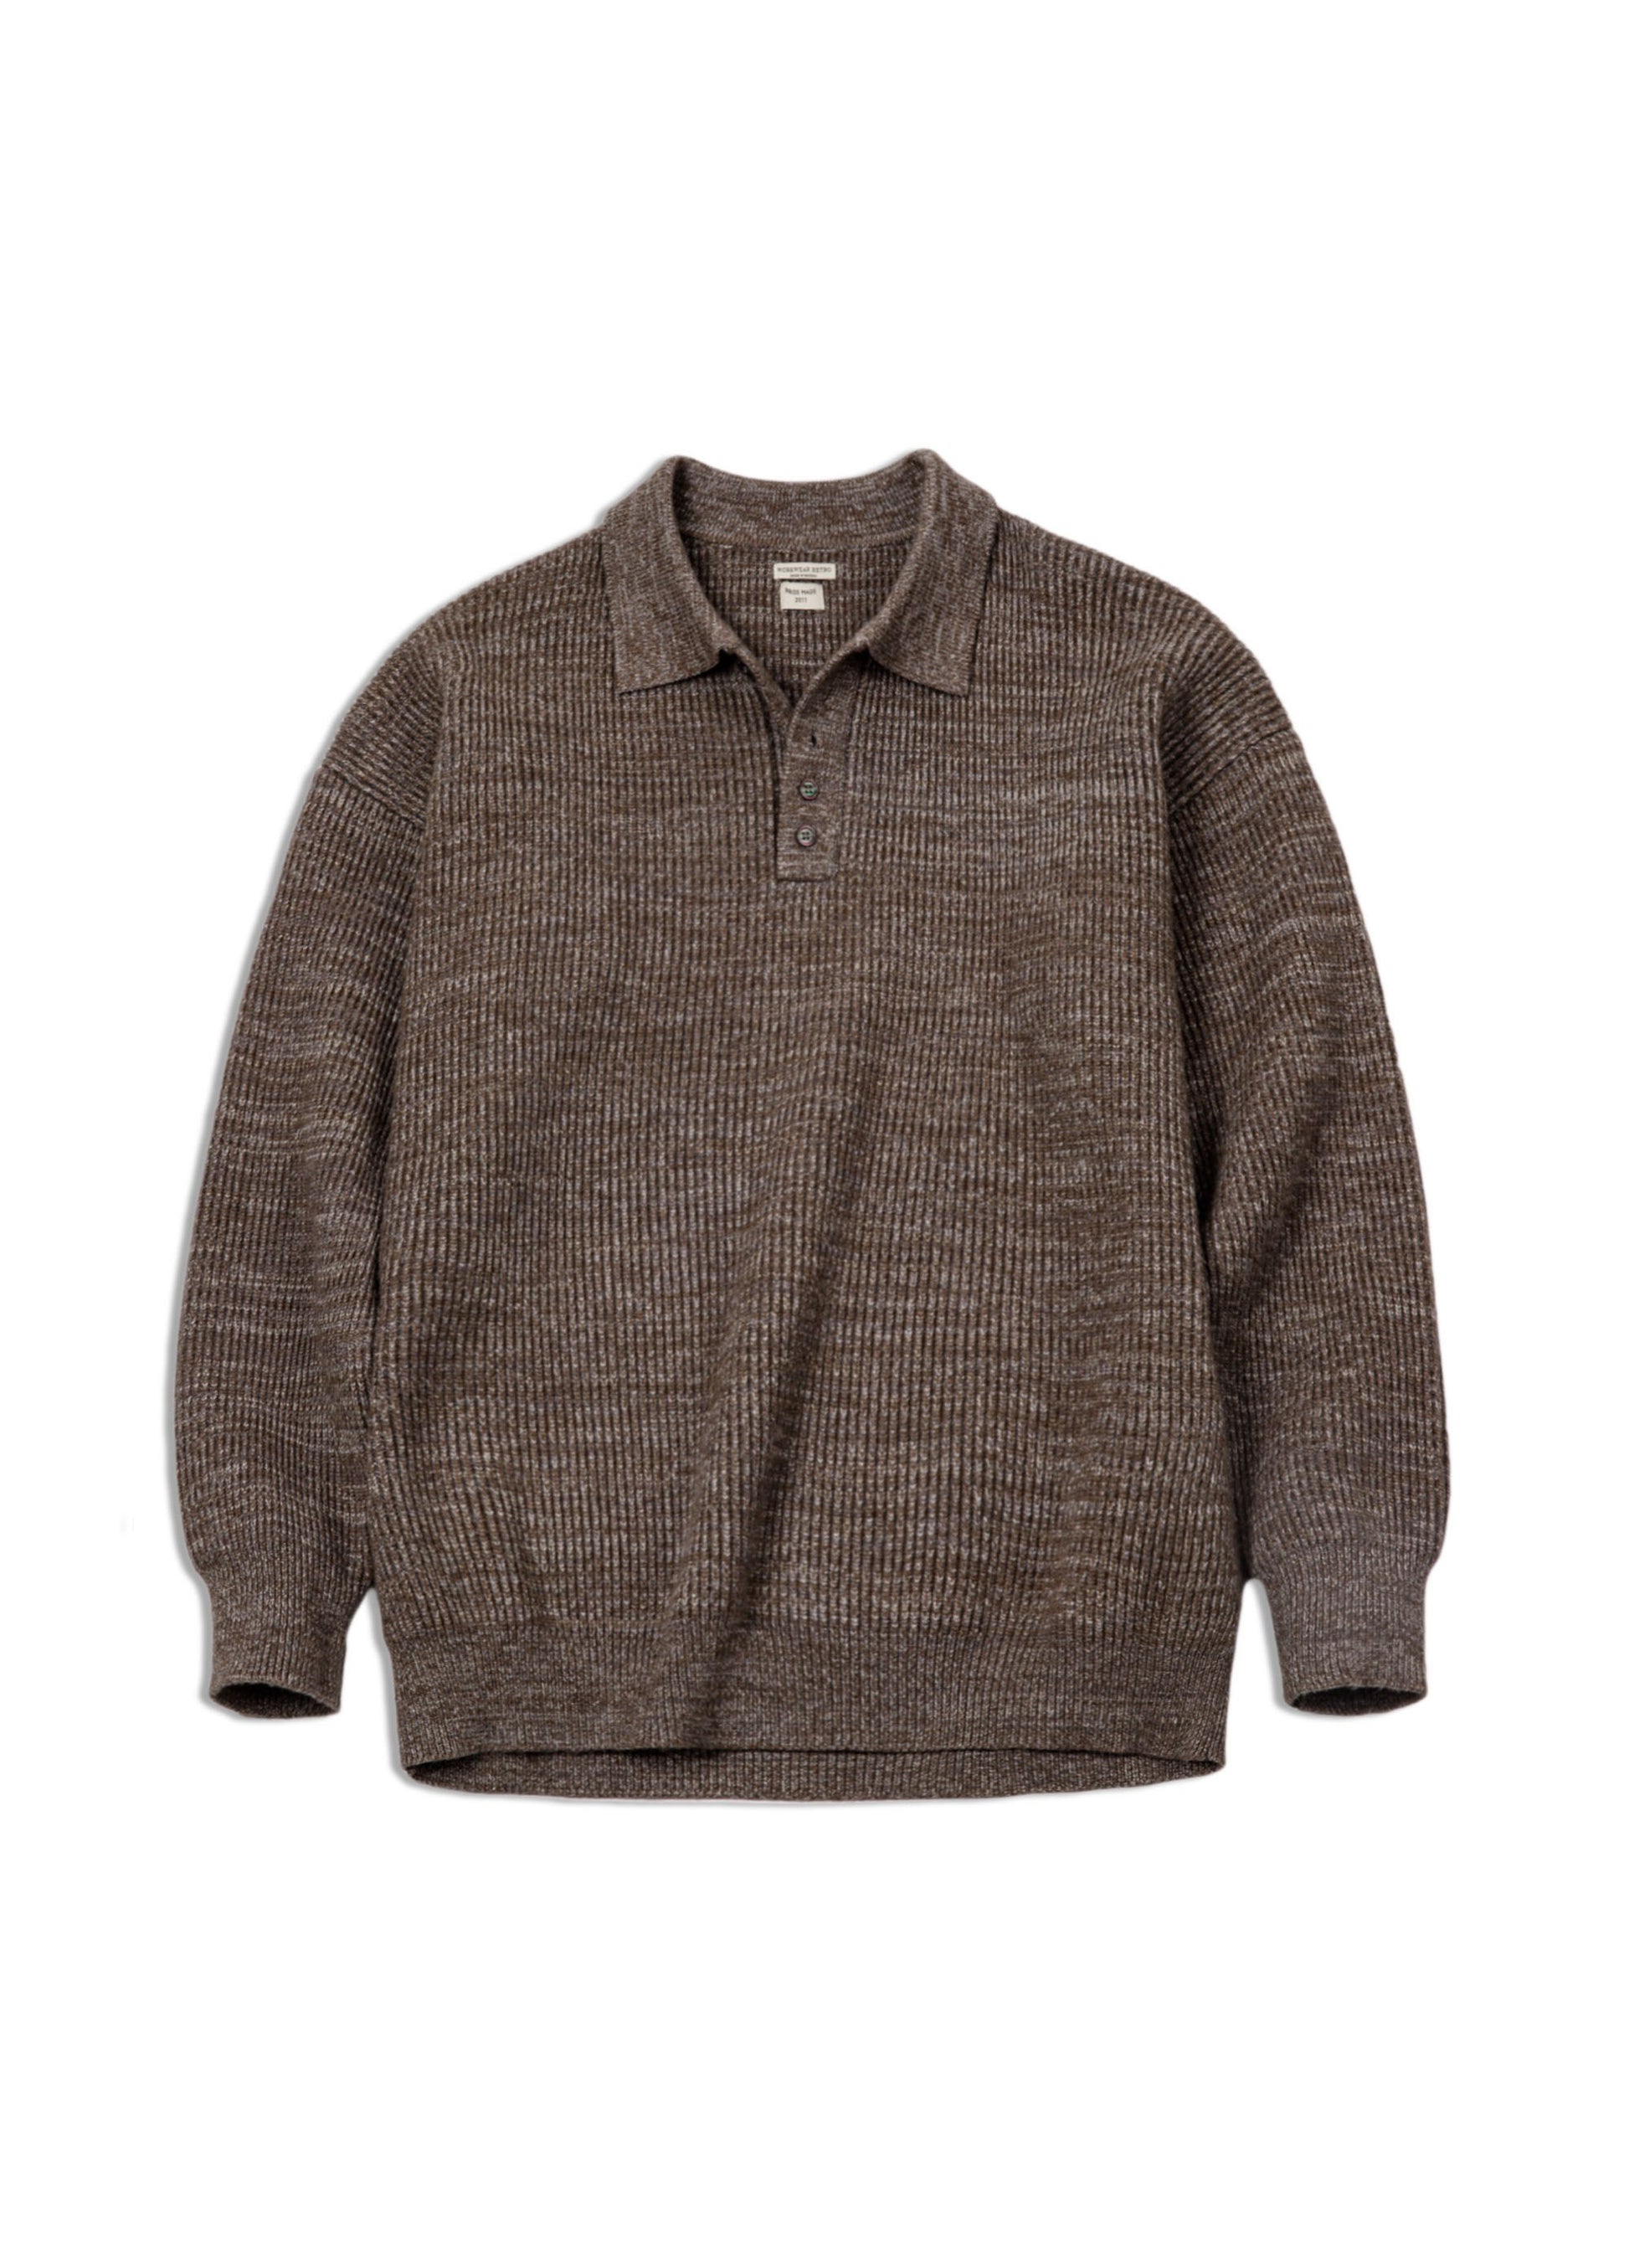 American Retro Knitted Polo Loose Wool Pullover Men's Sweater - Harmony Gallery